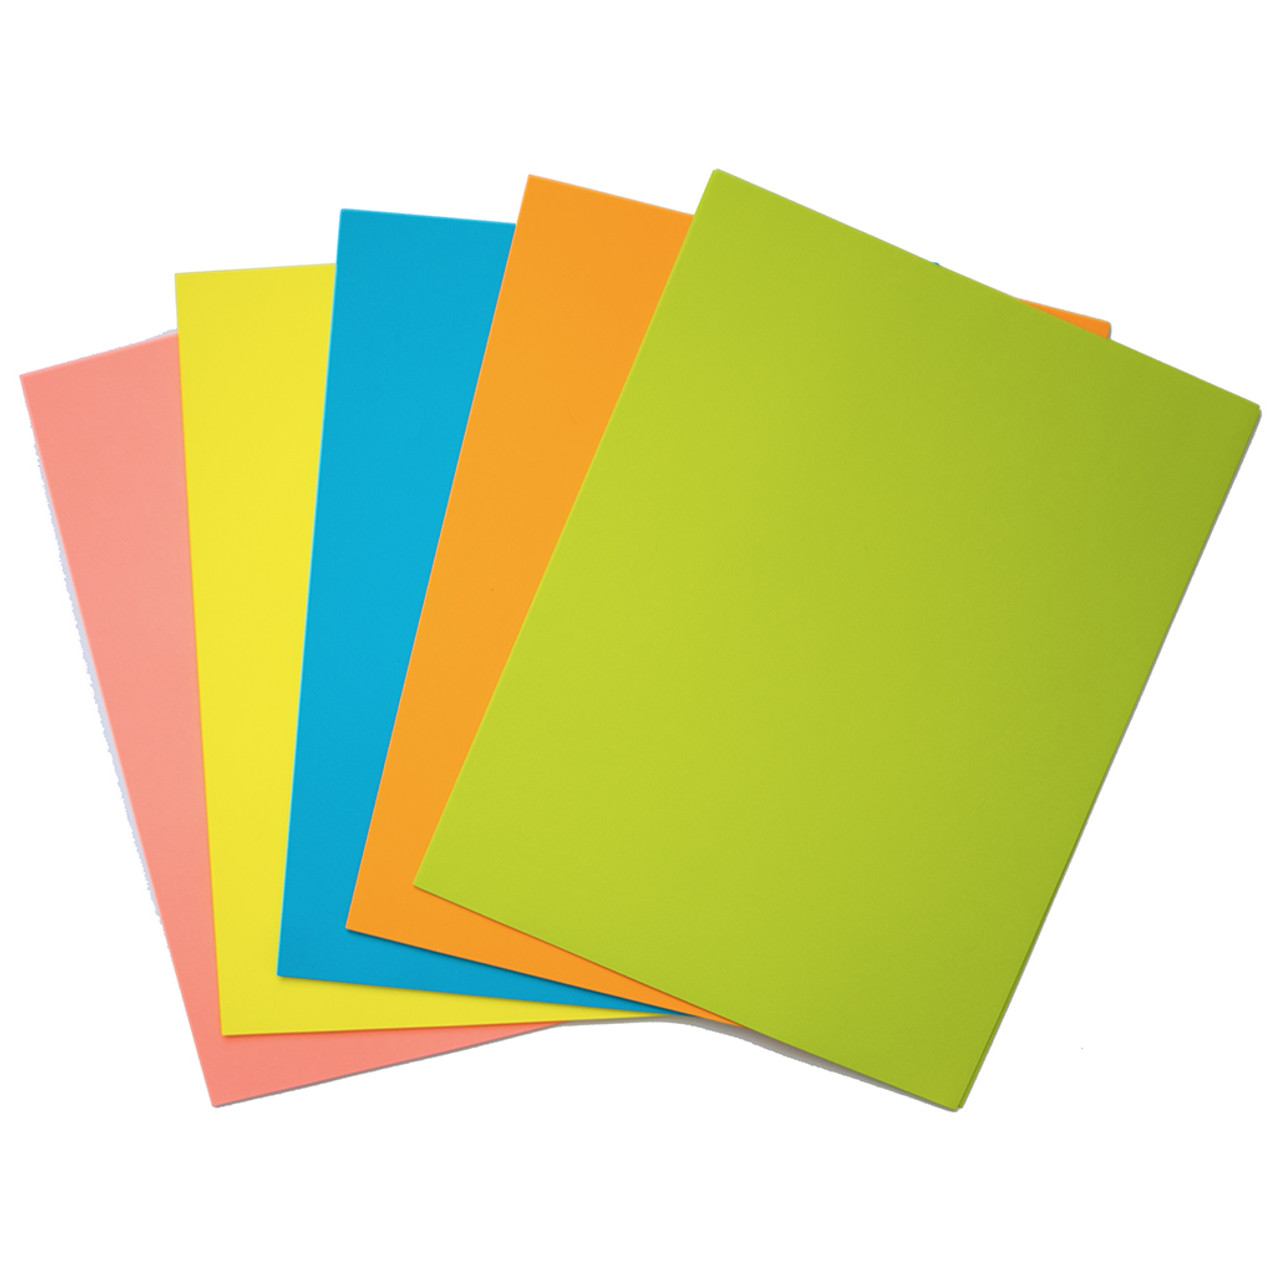 Neon Bright Colors Printable Cardstock Paper 8 1/2x11 - Inkjet/Laser - 4 Colors - 50 Sheets